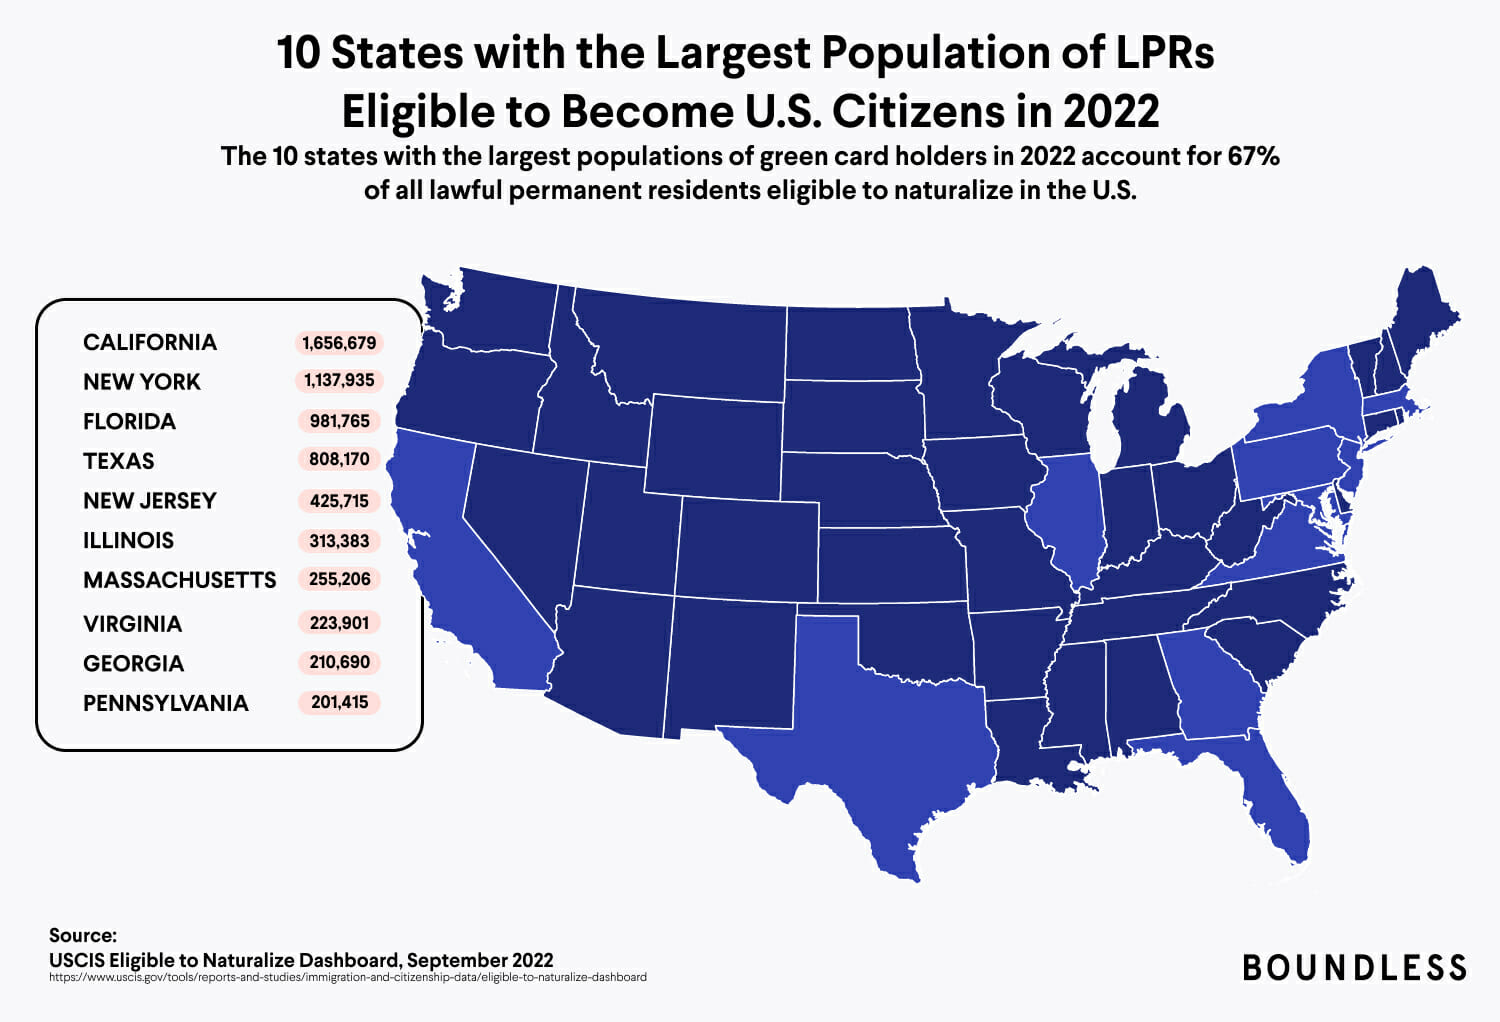 States with largest population of eligible US citizens